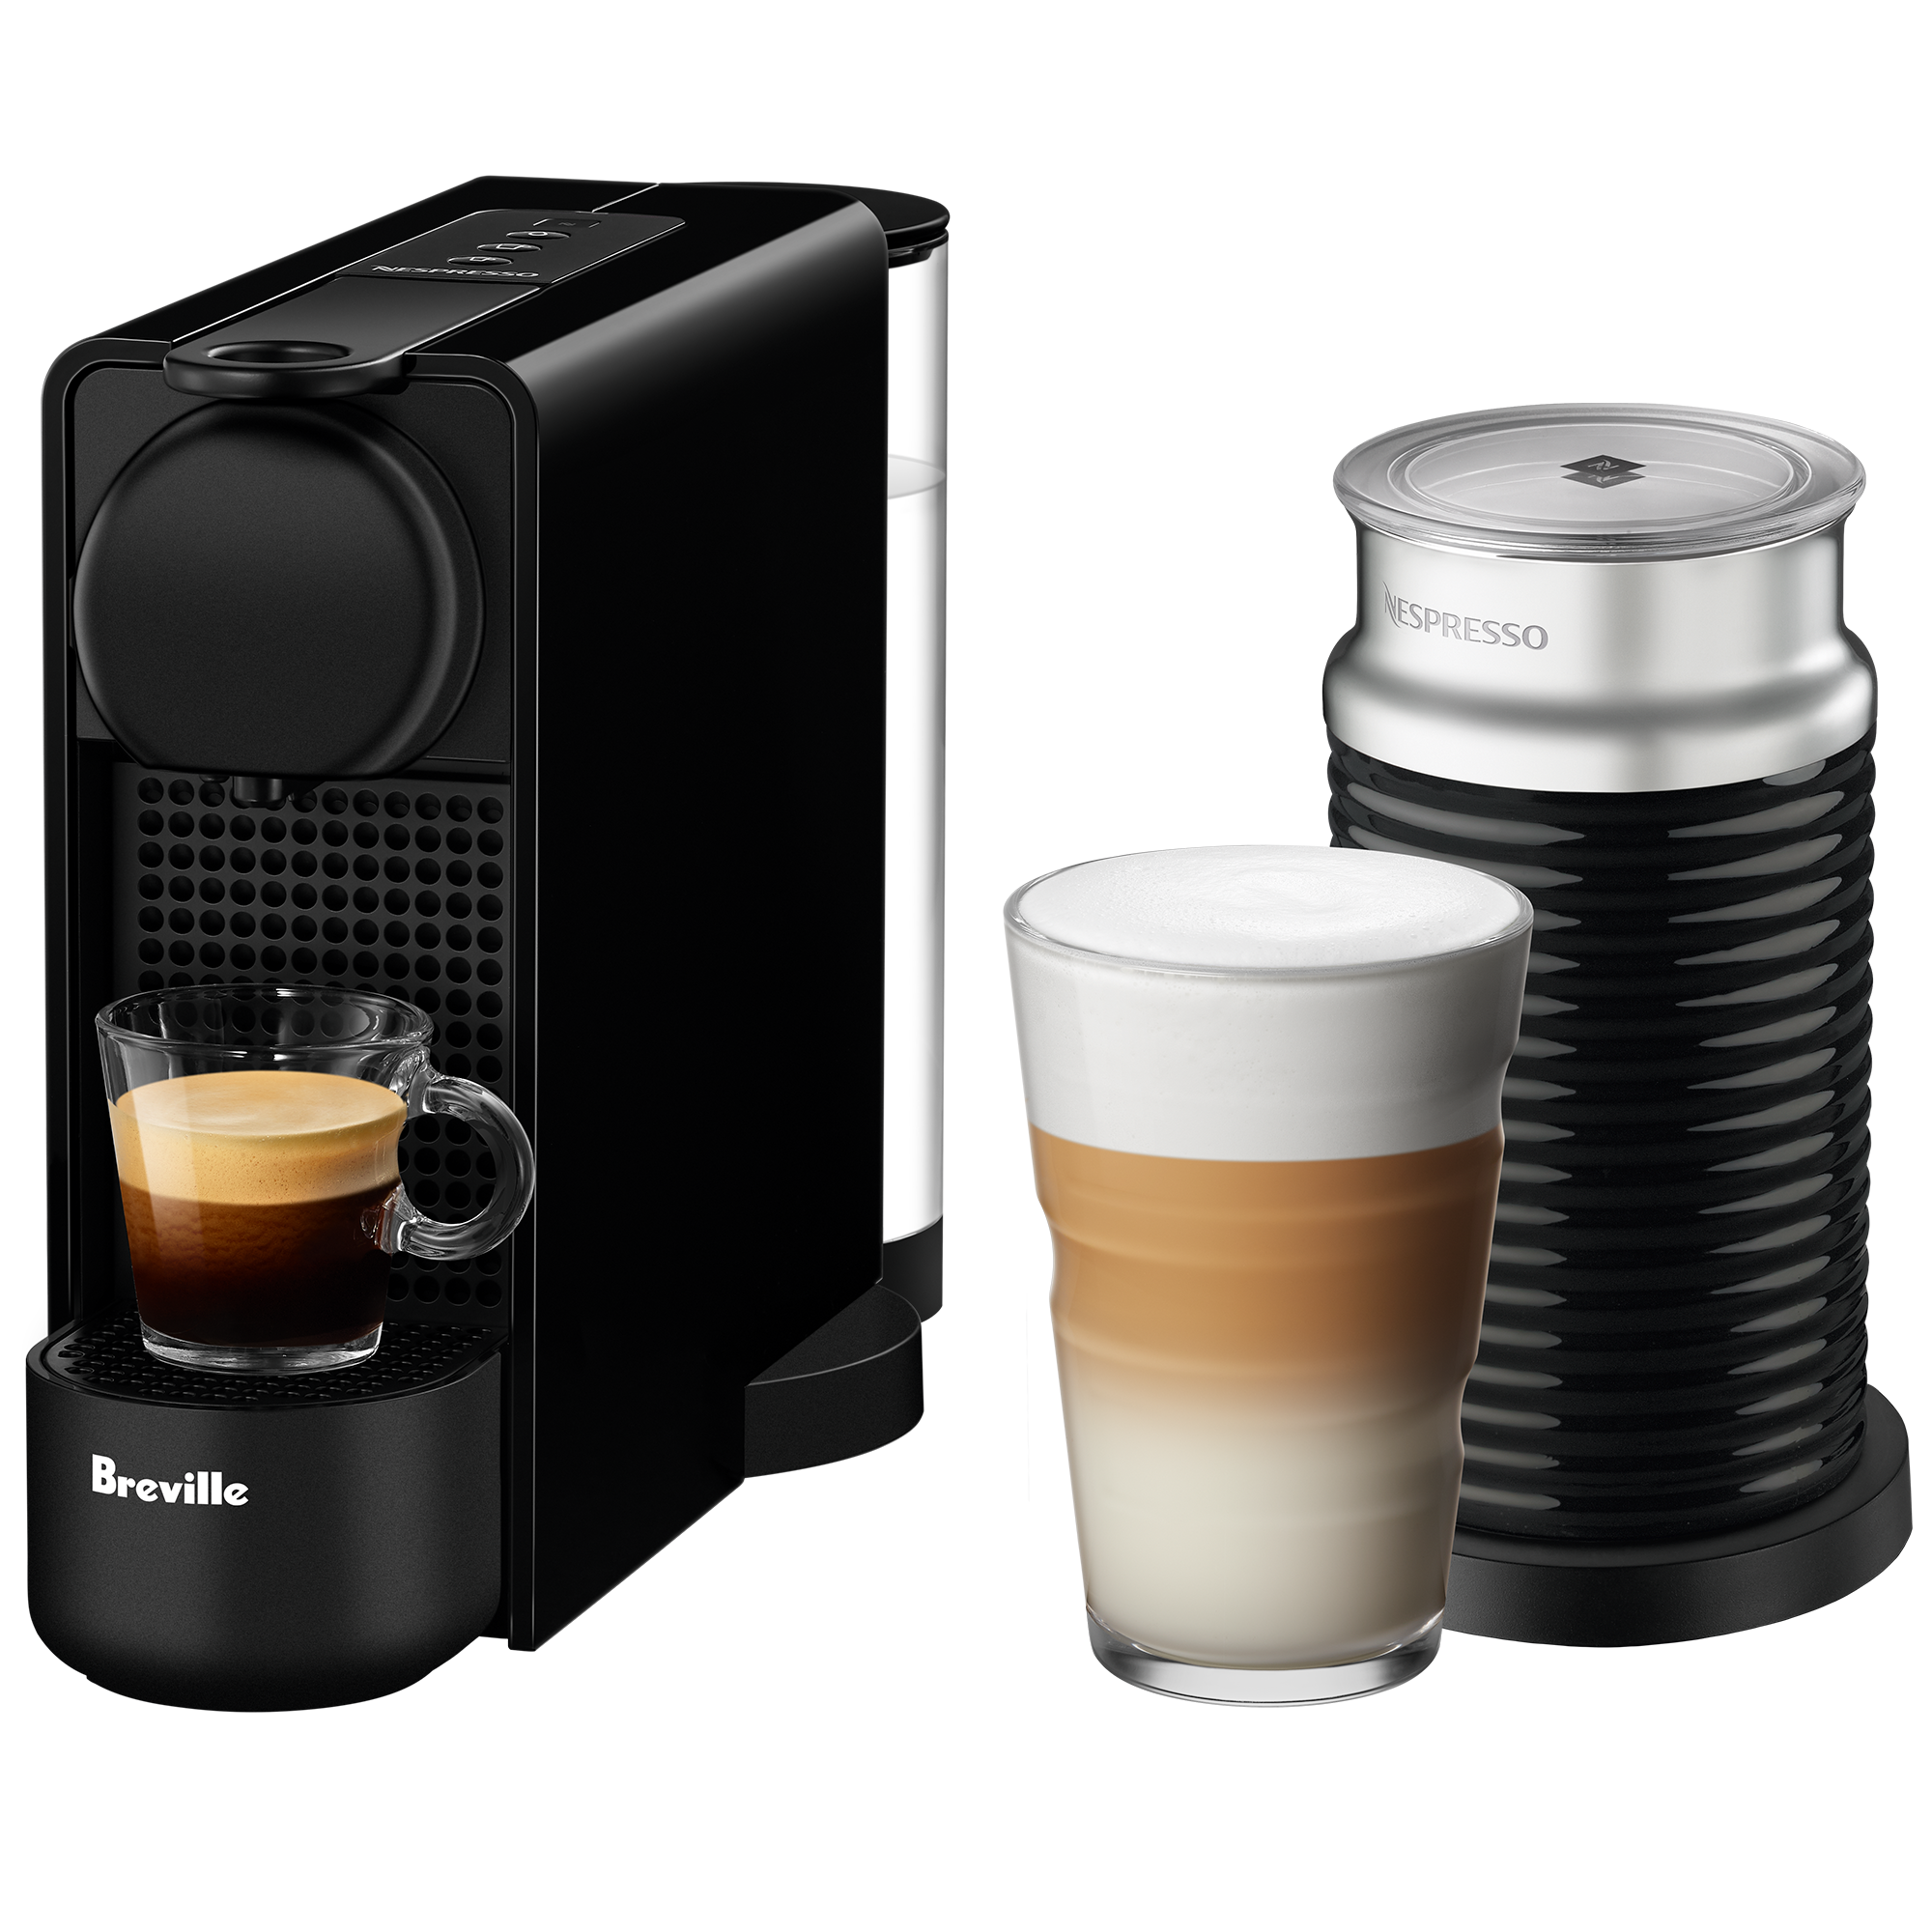 Essenza Plus coffee machine and Aeroccino3 Milk Frother